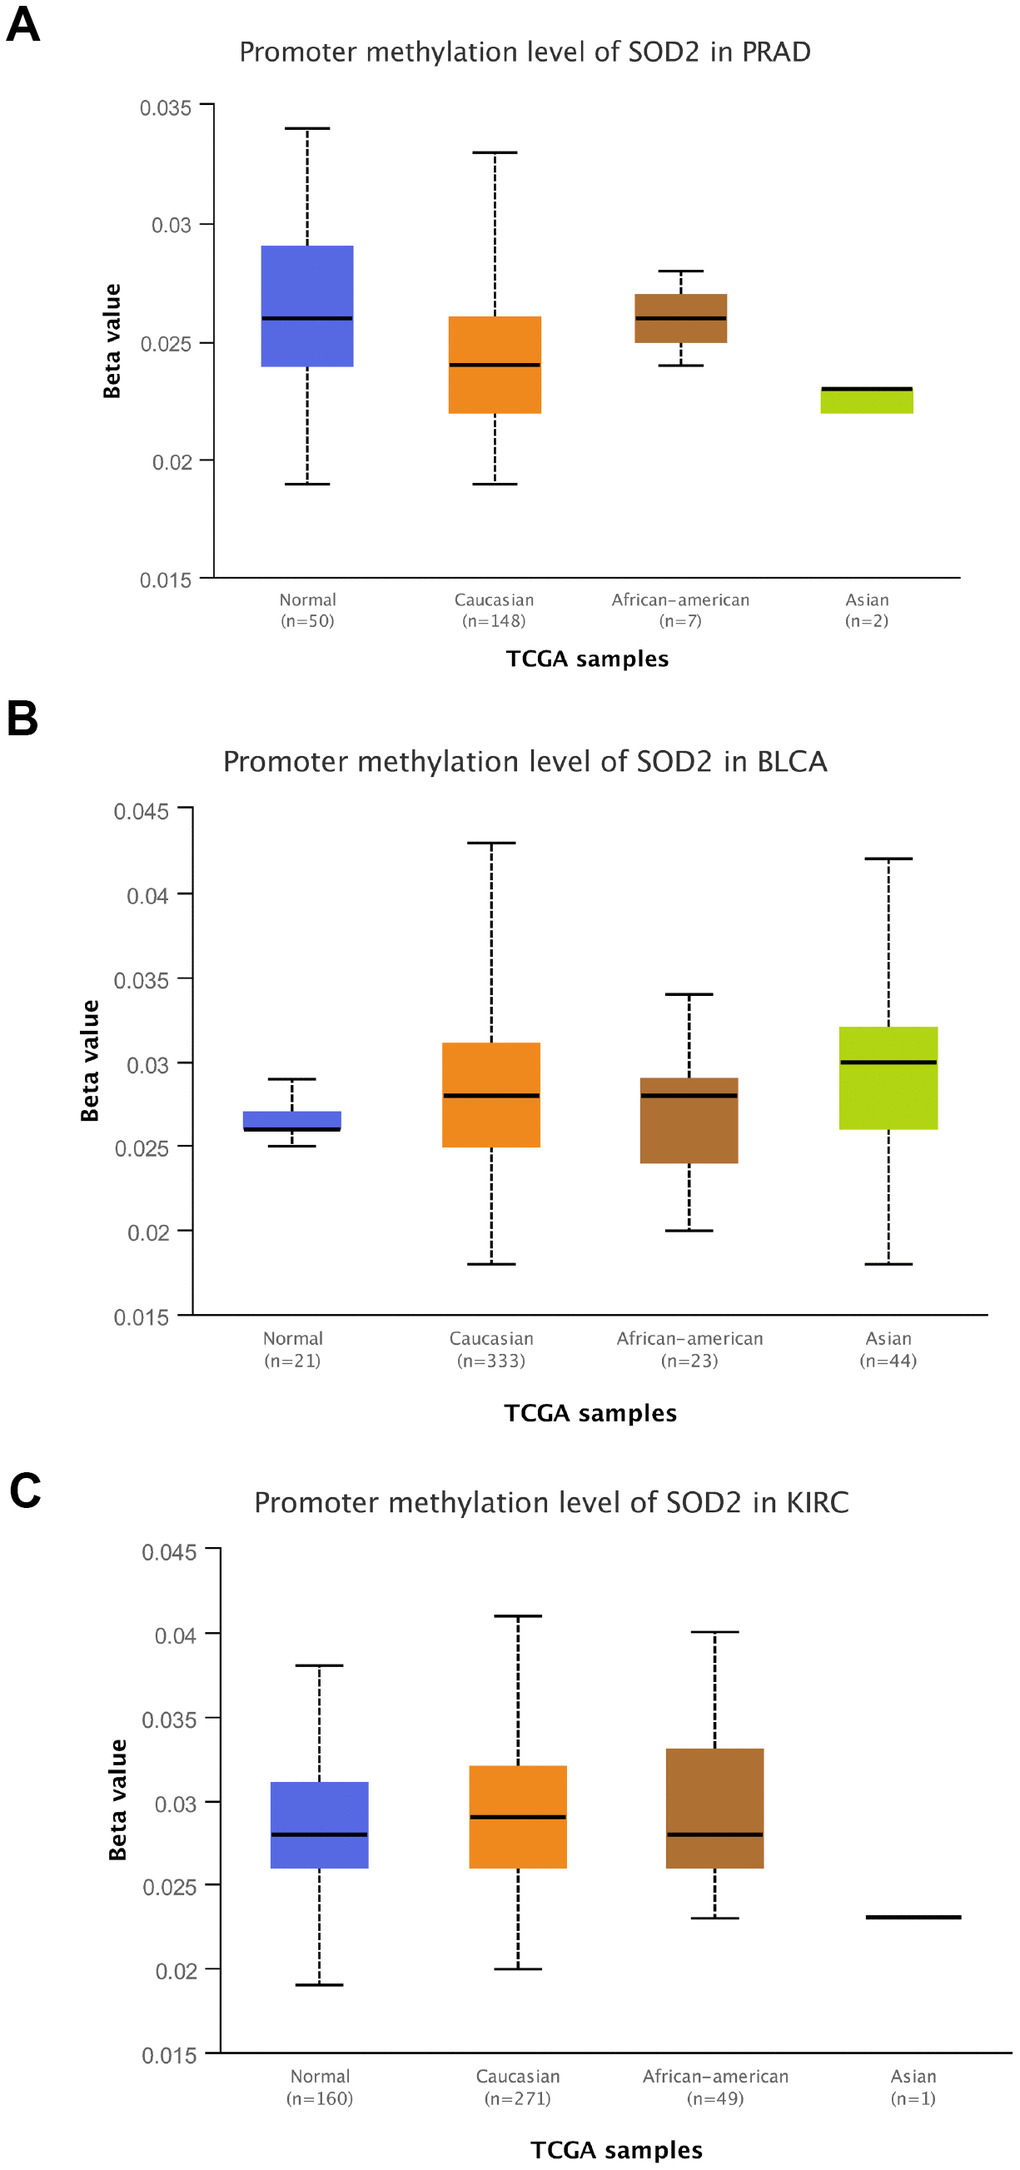 Promoter methylation level of SOD2. Promoter methylation level of SOD2 was decreased in both Caucasian and Asian prostate cancer participants (A). SOD2 promoter methylation level was both up-regulated in bladder cancer subjects (B). The methylation level was increased in Caucasian renal cell carcinoma patients and decreased in Asian cases (C).